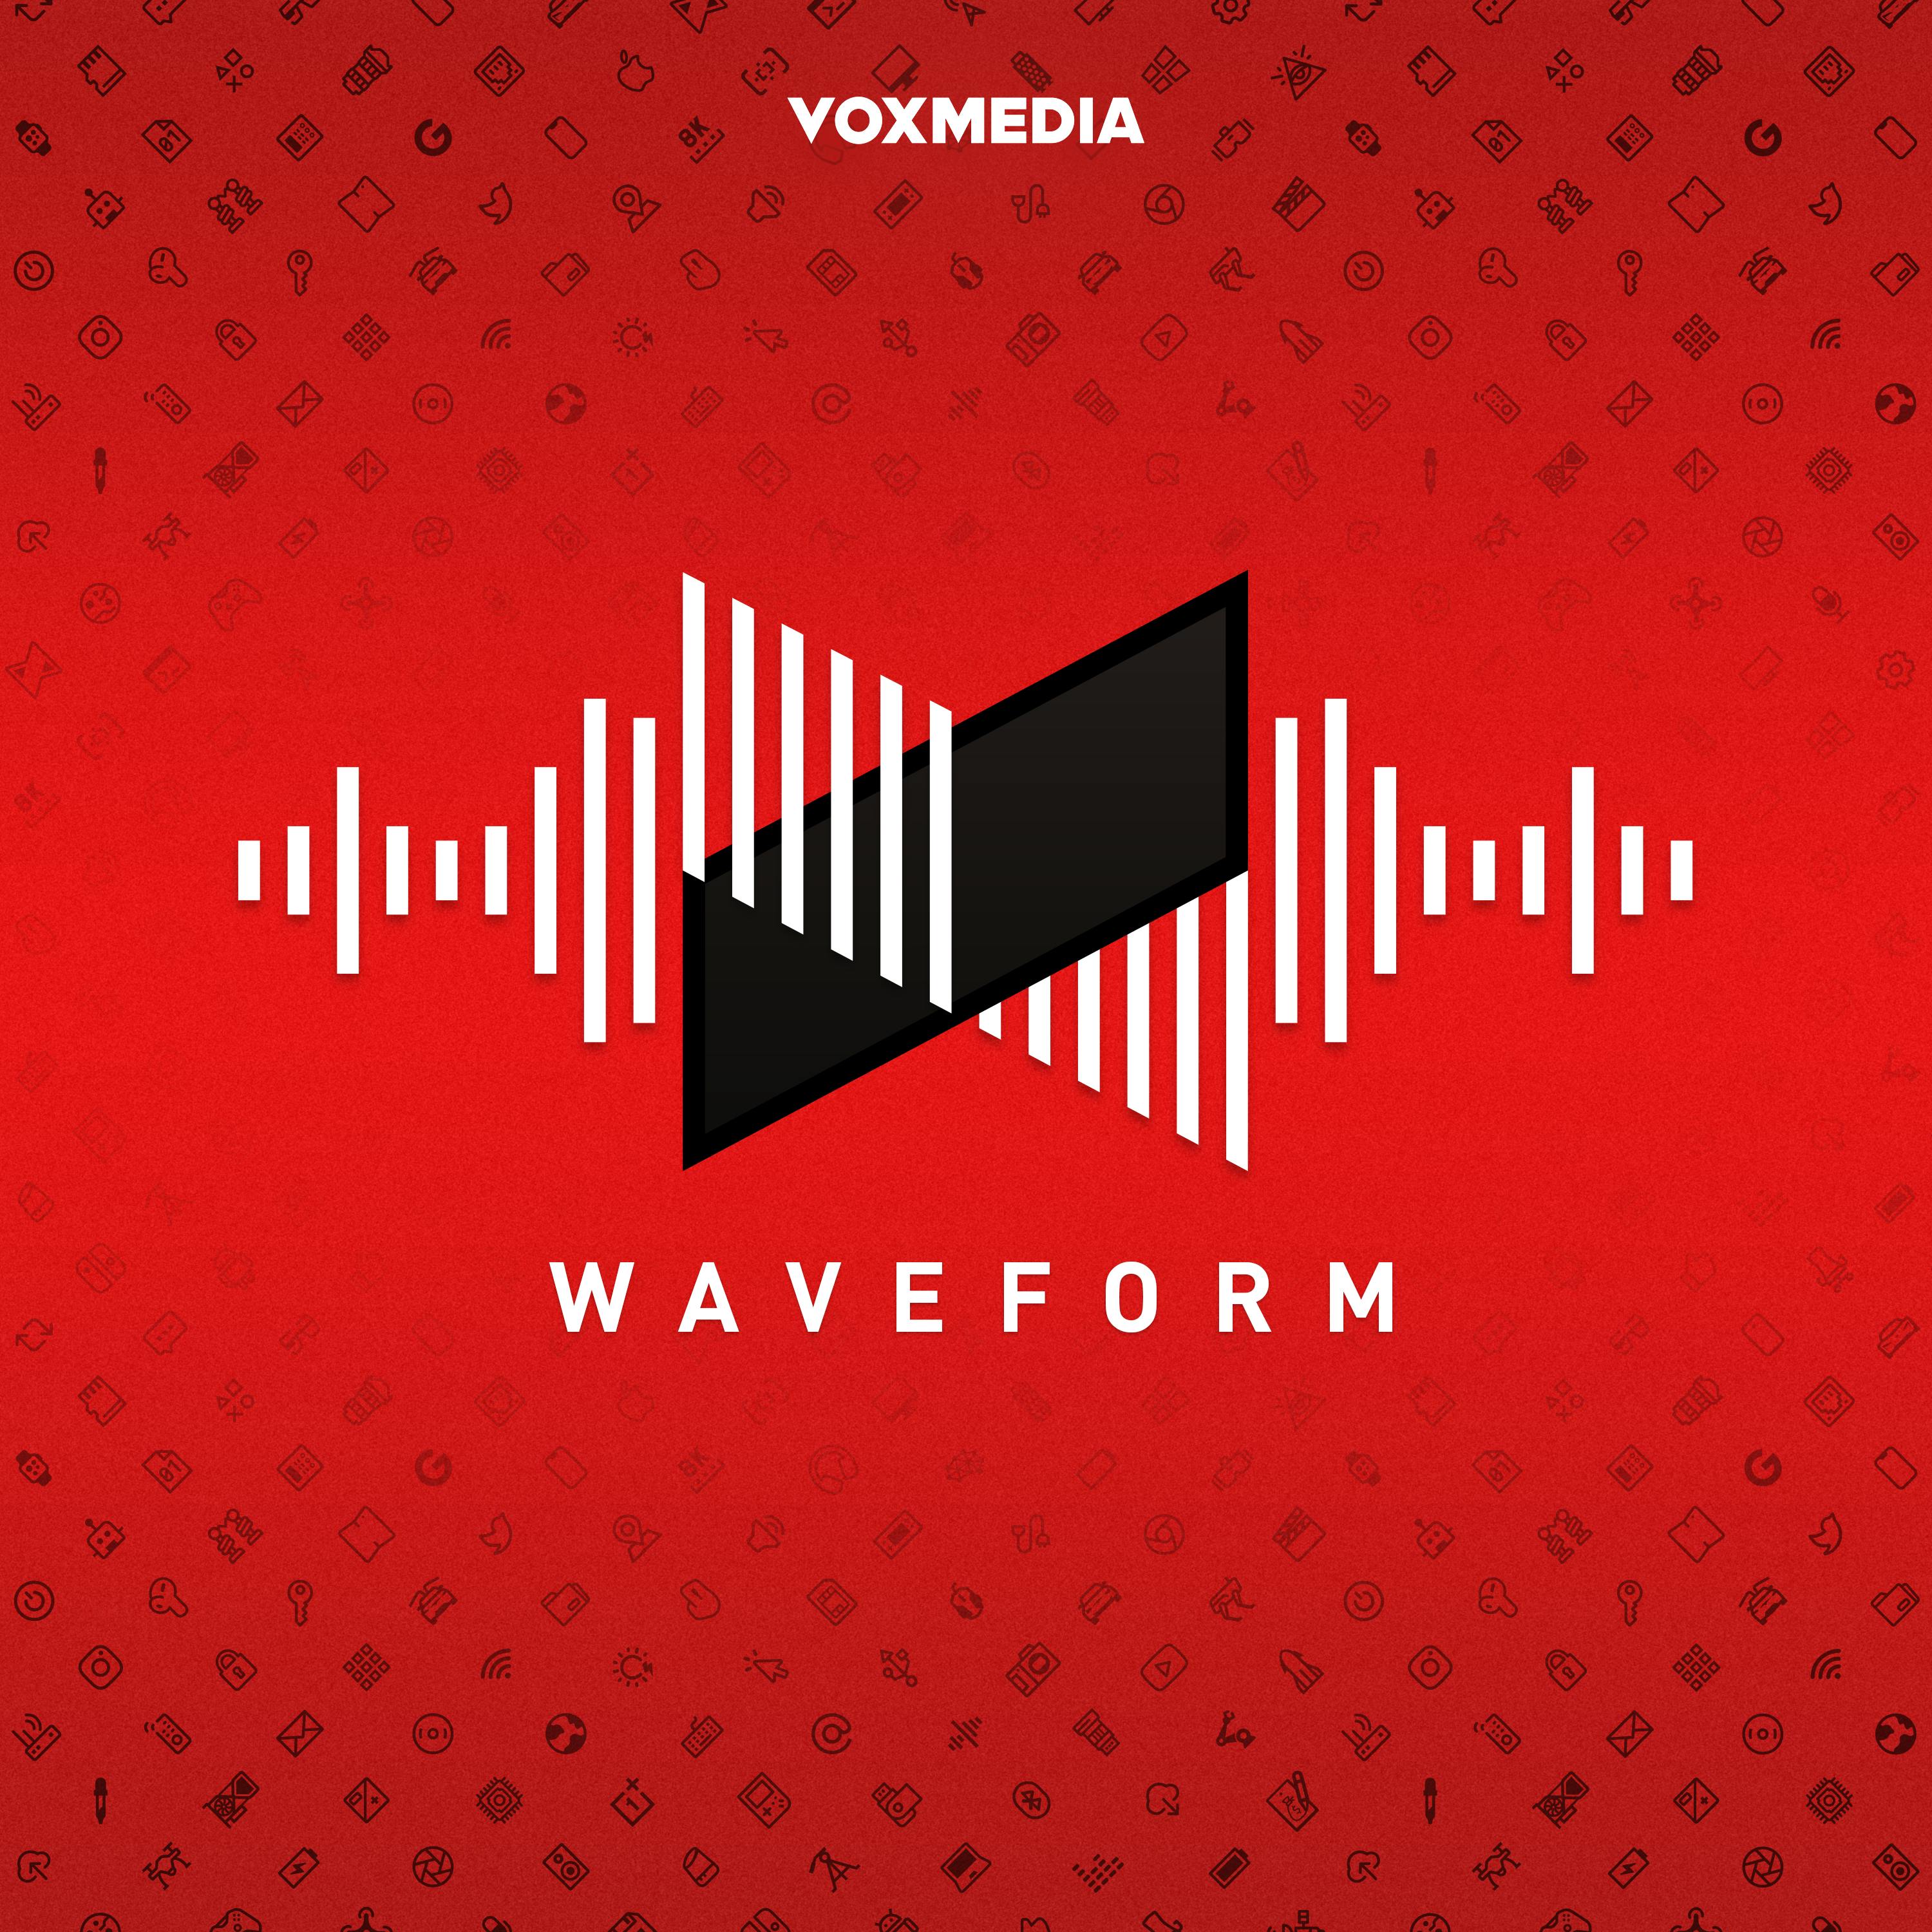 Waveform: The MKBHD Podcast logo